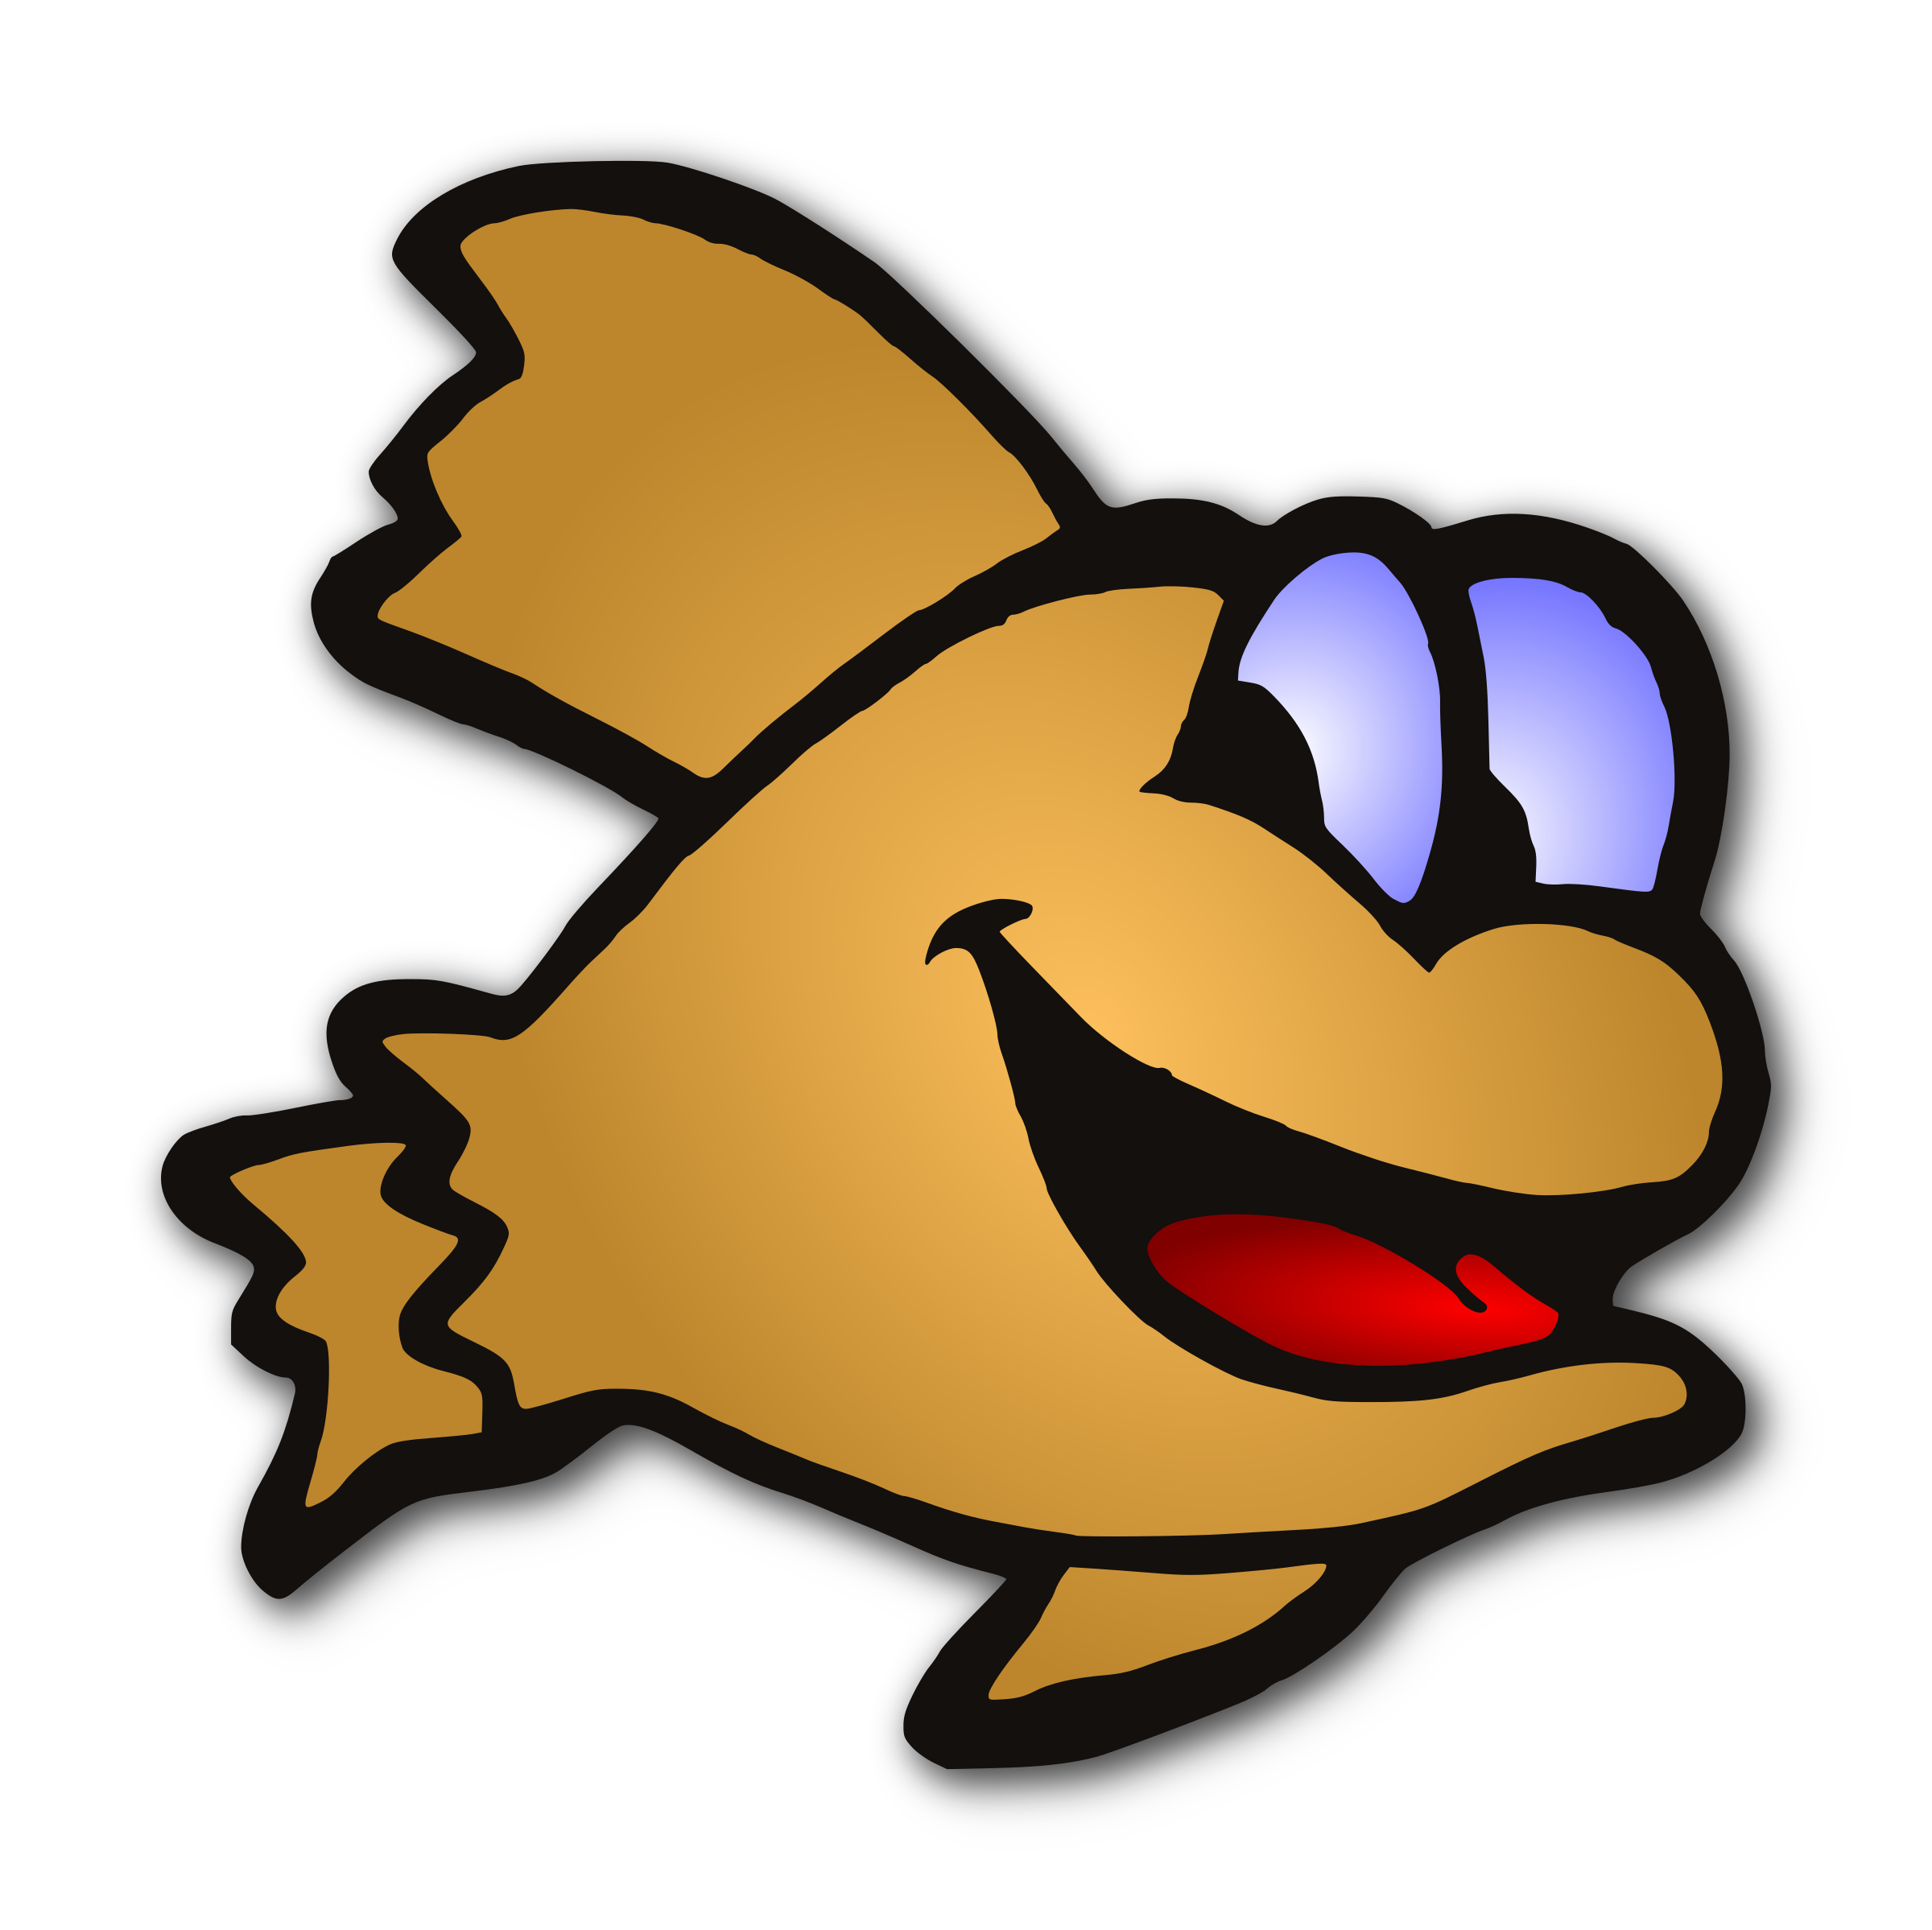 Download Gold Fish Vector Clipart image - Free stock photo - Public Domain photo - CC0 Images